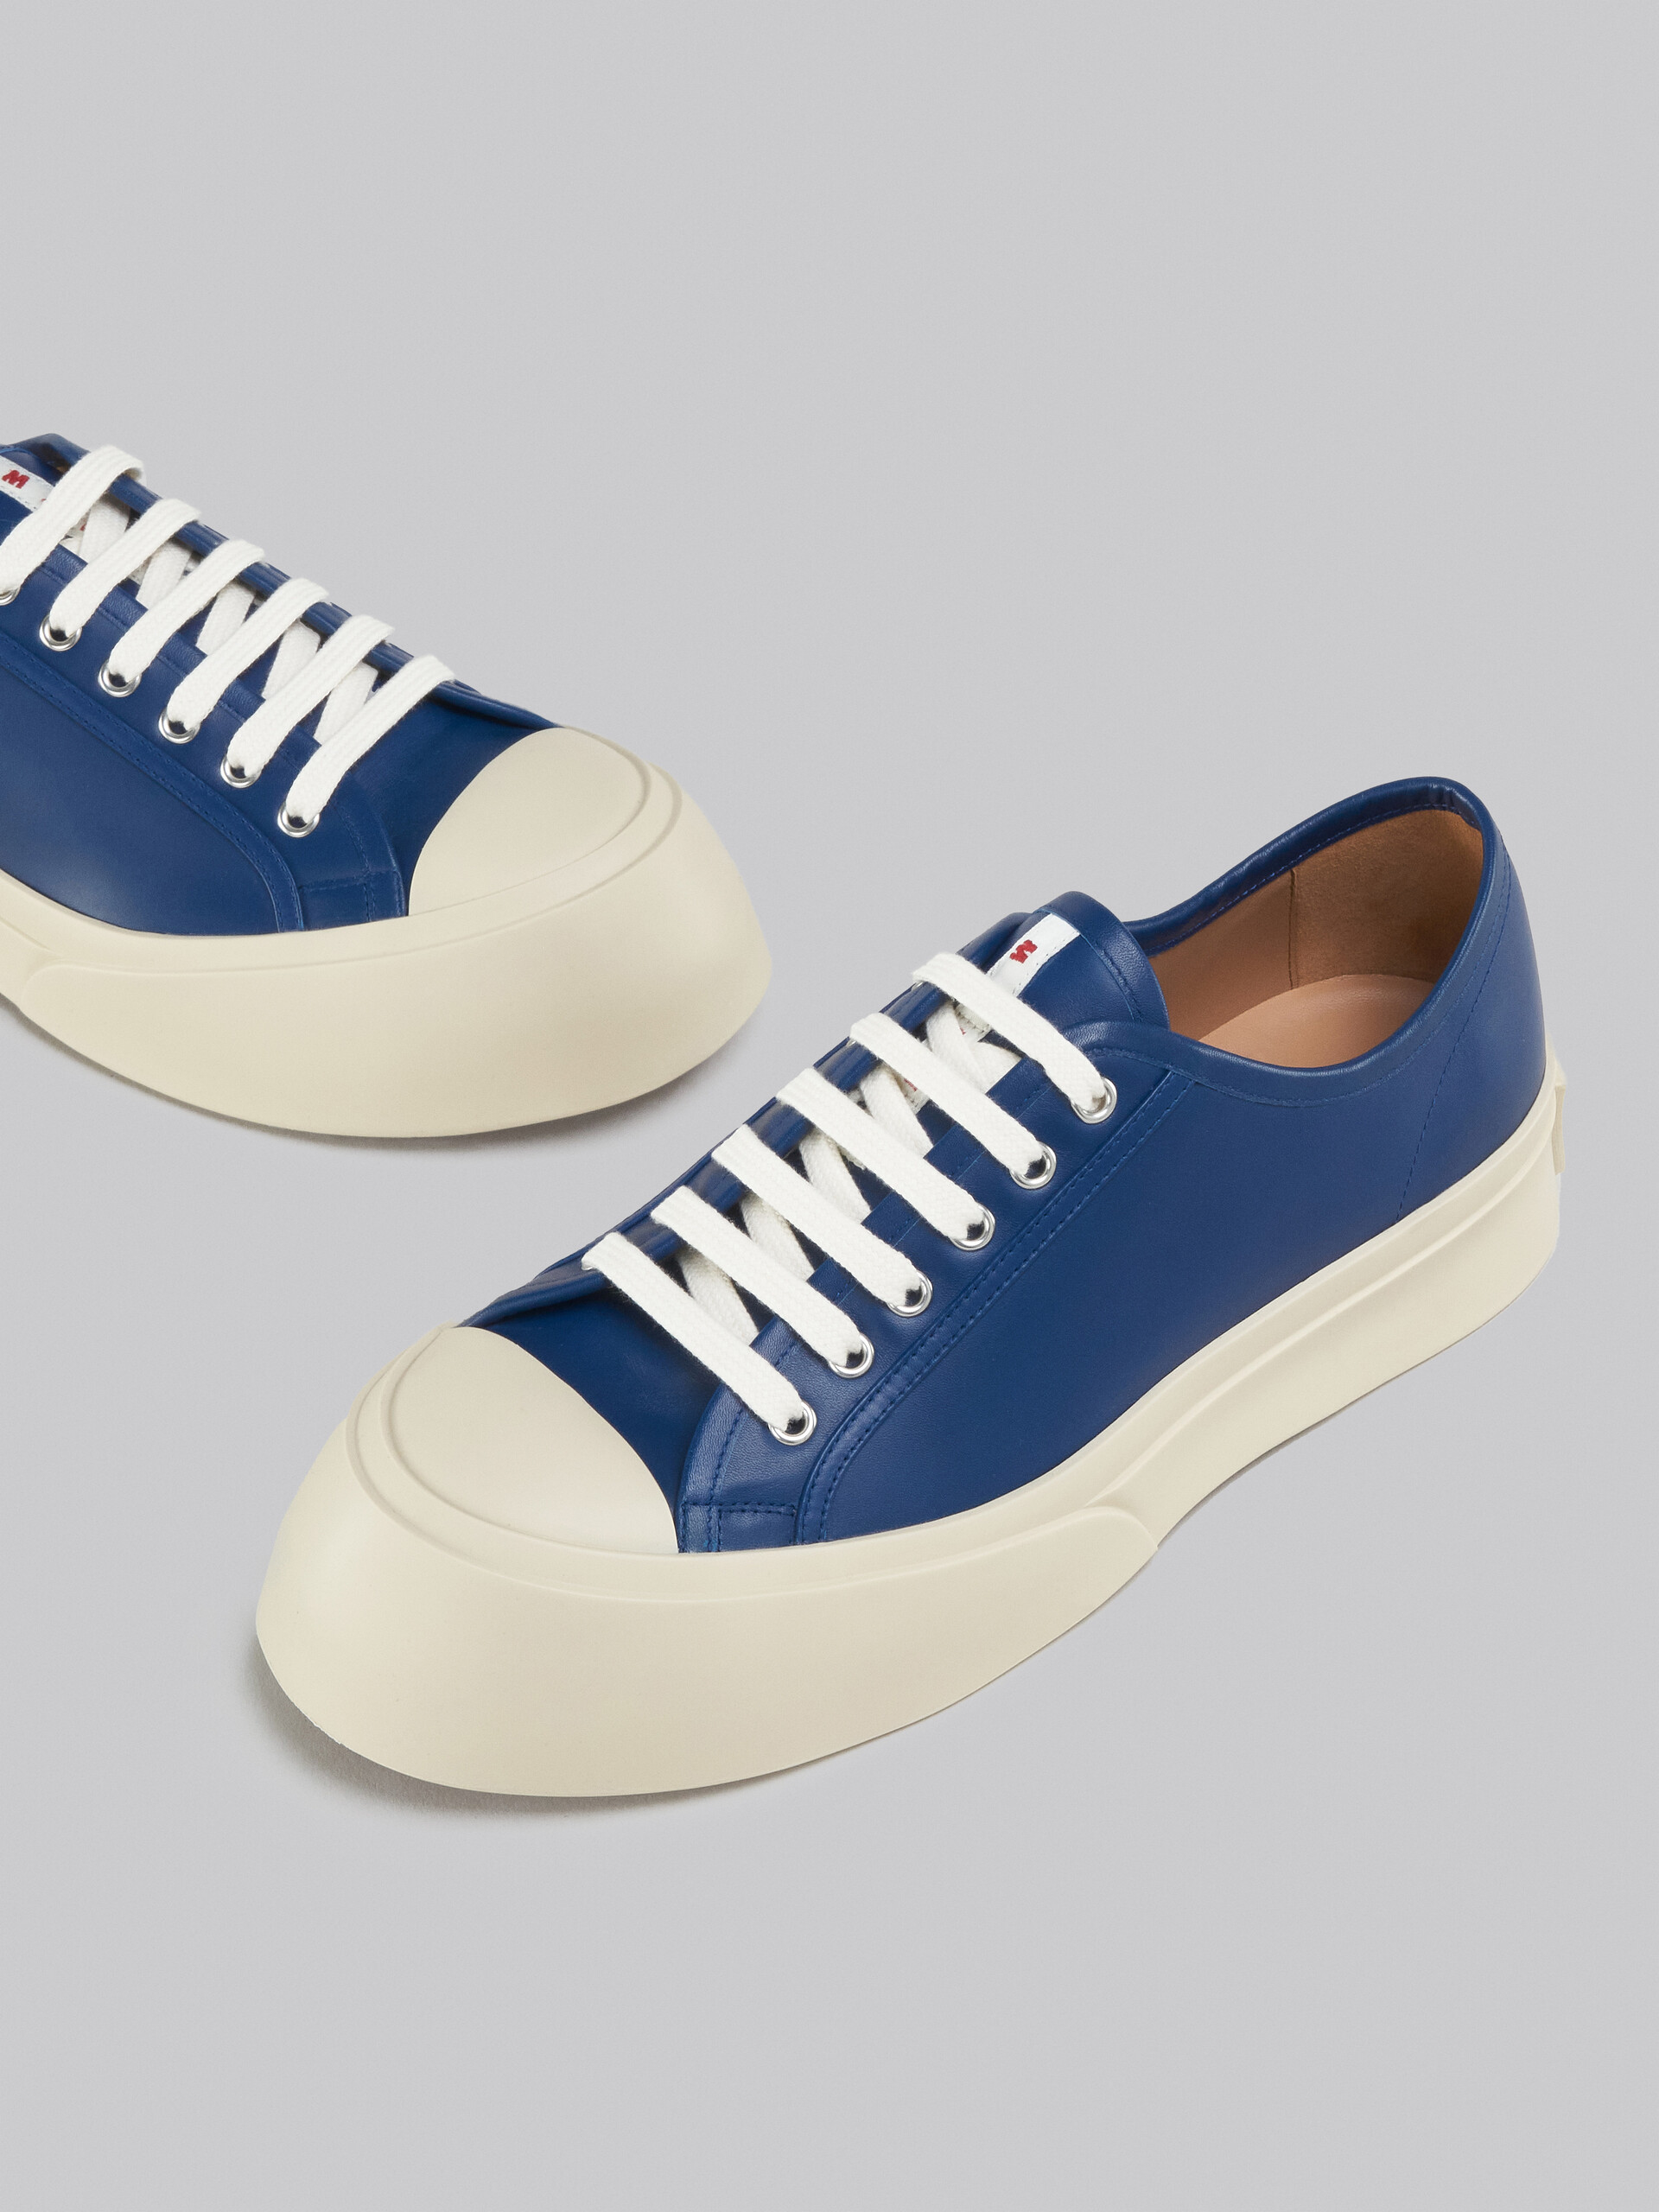 Blue nappa leather Pablo sneaker - Sneakers - Image 5